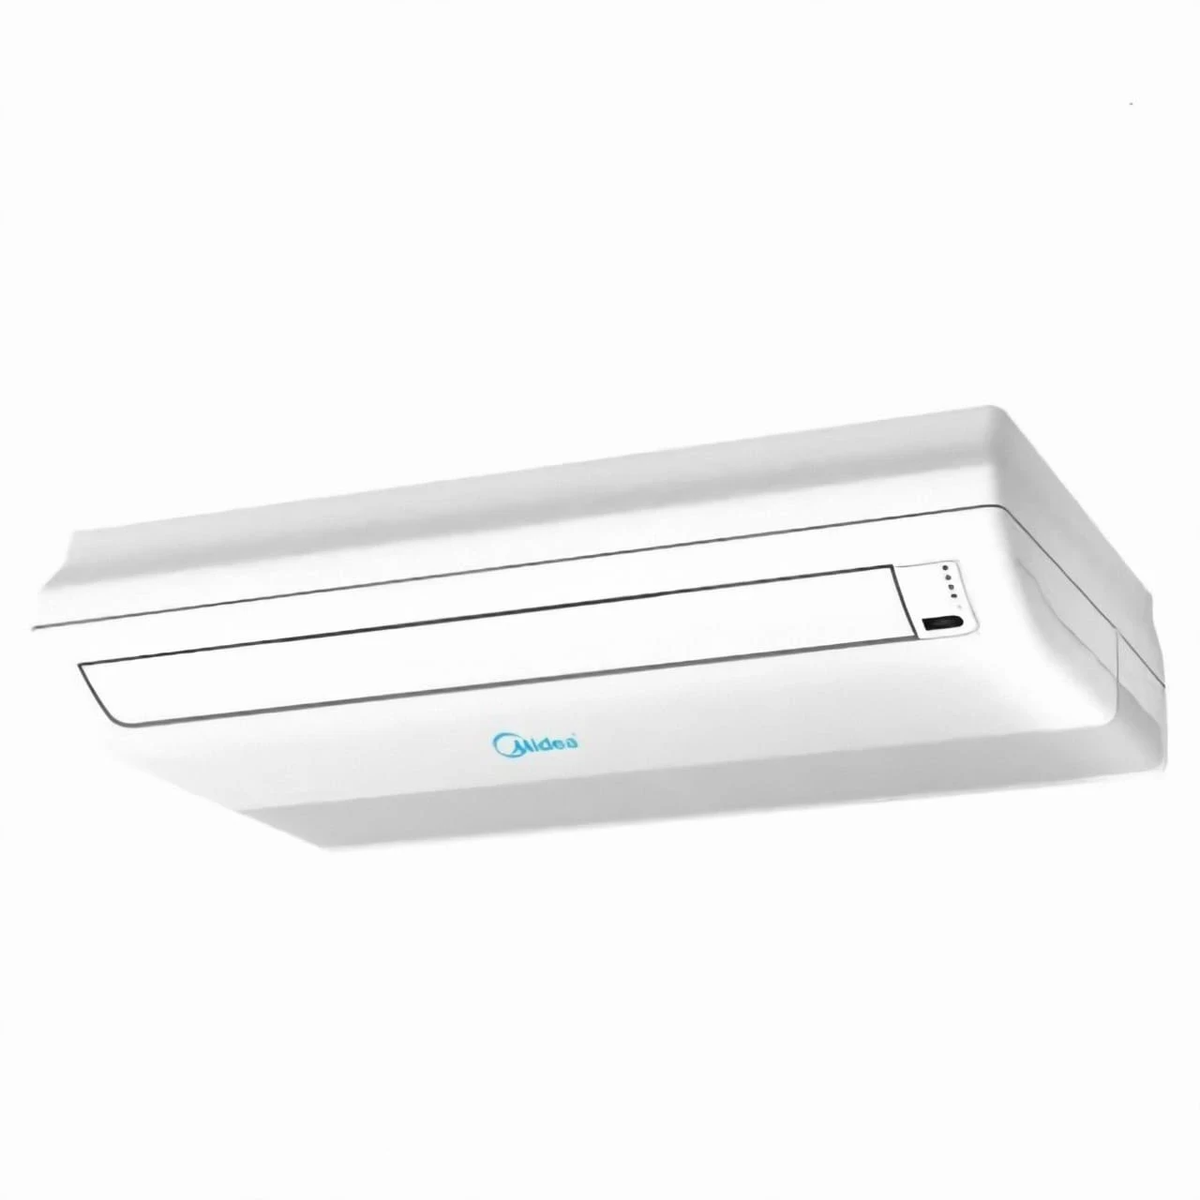 Midea Floor Ceiling Air Conditioner, Cooling & Heating, 2.25 HP, White - MSZ1T-18HR